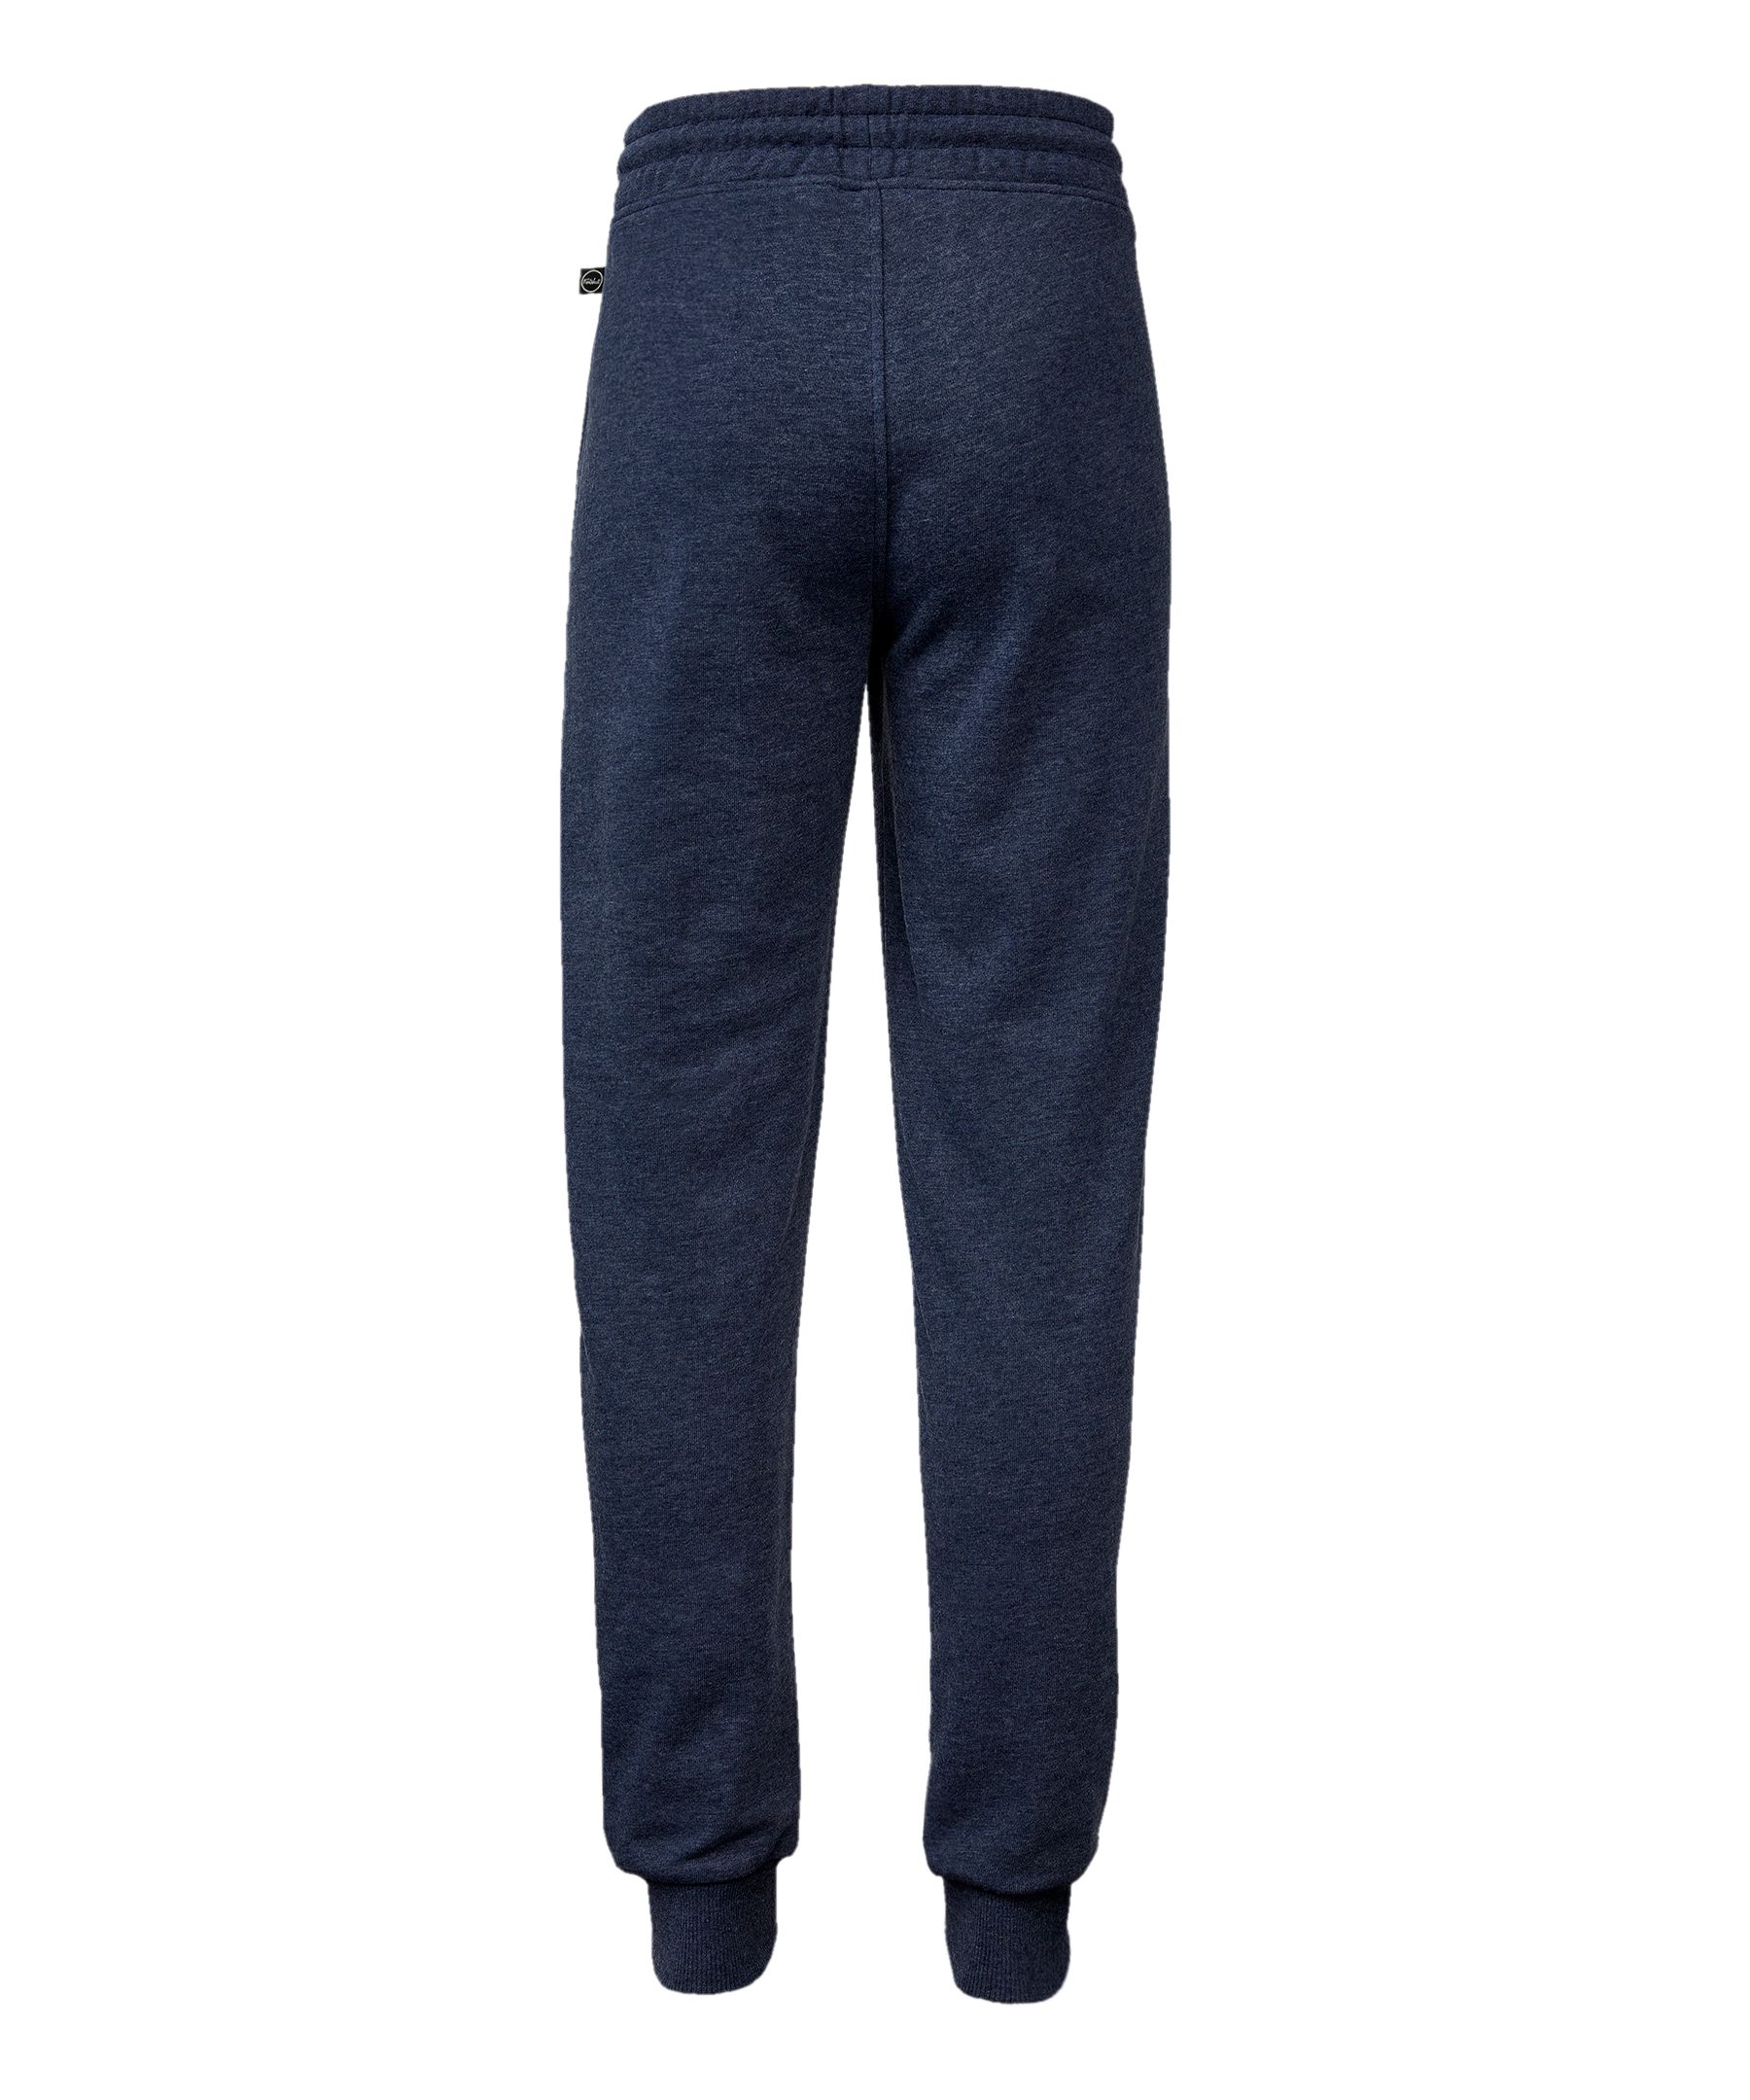 Skinny French Terry Sweatpant Navy - Unisex - Made in Canada - Province of  Canada